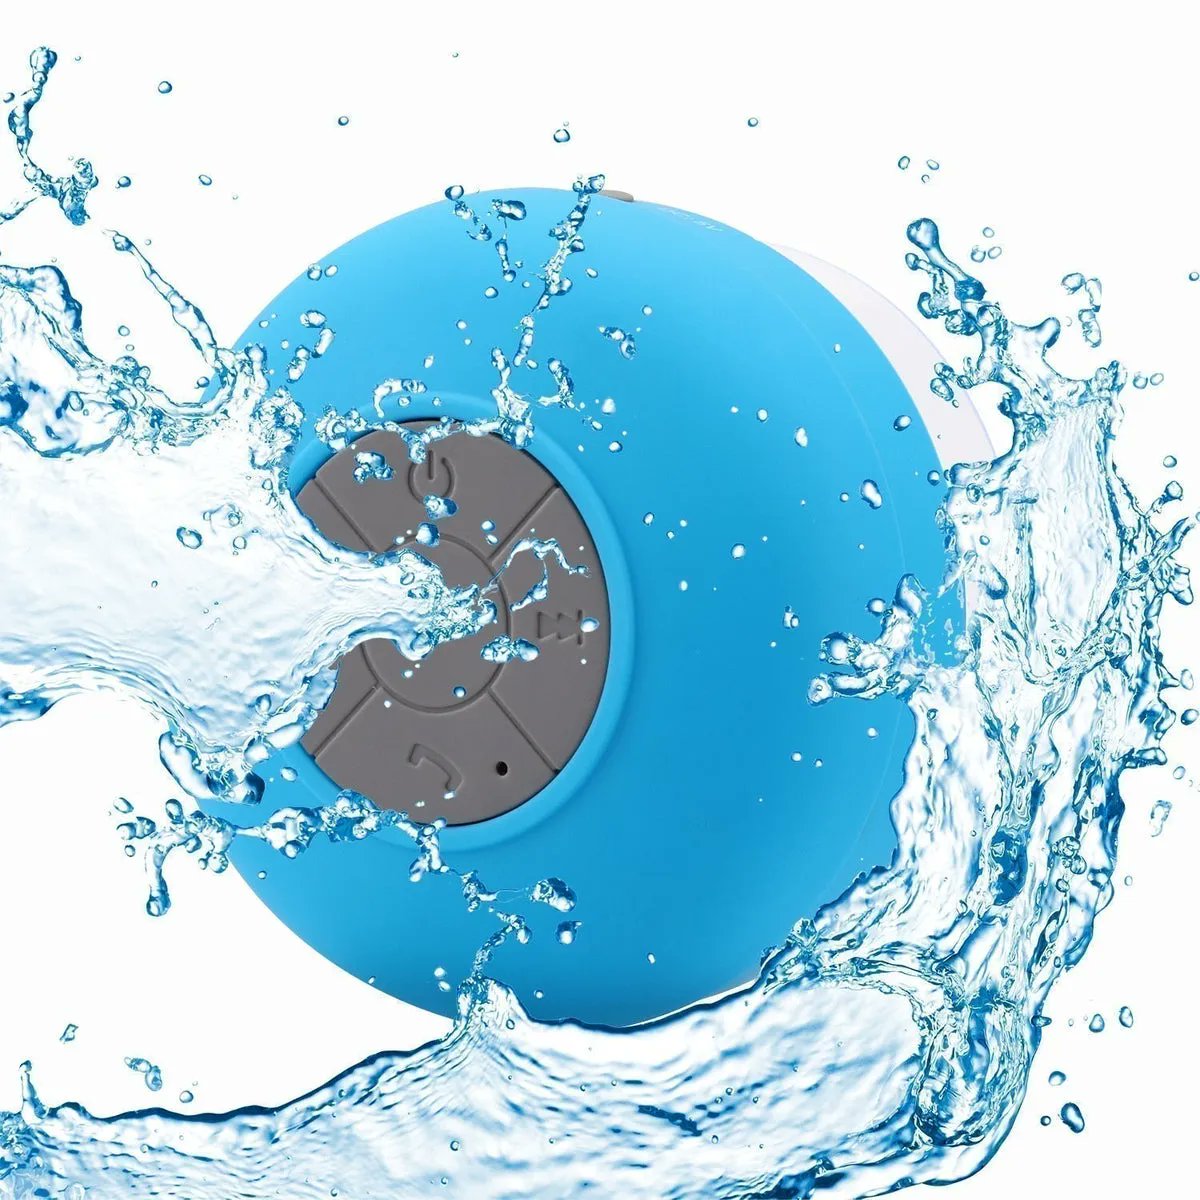 Do you like to sing in the shower?  Check out this wireless, waterproof bluetooth speaker.
#bluetooth #waterproofspeaker #wireless #simpletech #shopnow #EasterWeekend 

buff.ly/3GuUWyS